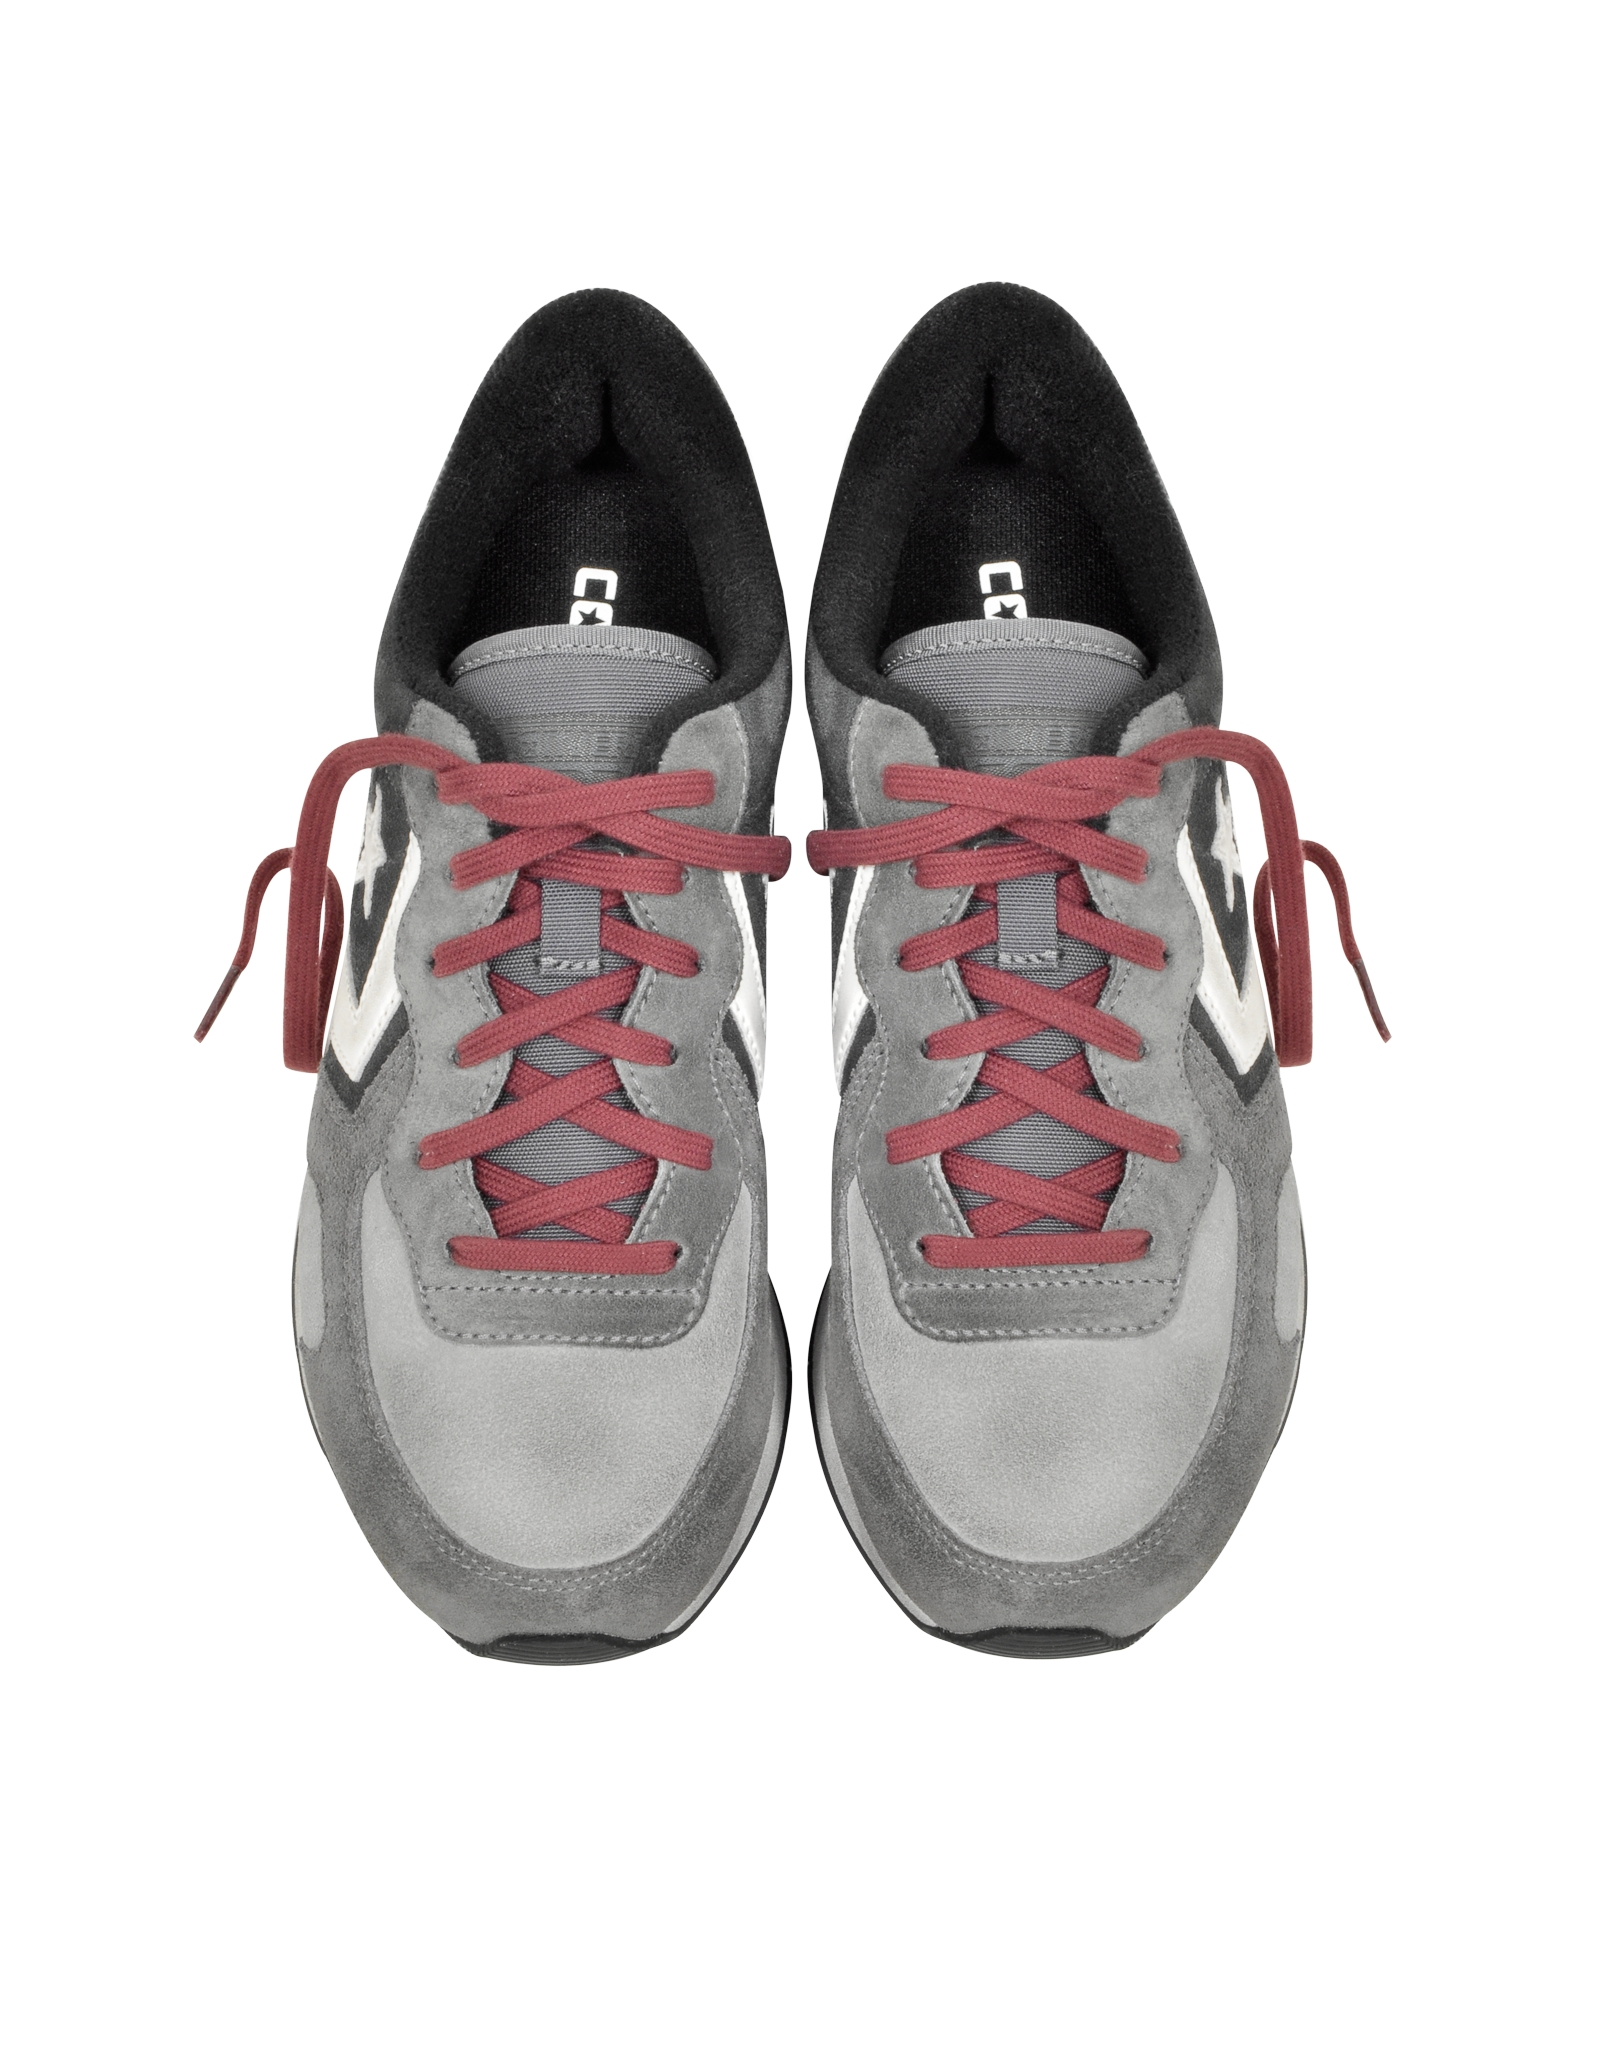 Converse Auckland Racer Ox Gray Dust And Charcoal Suede Sneaker in Gray ...